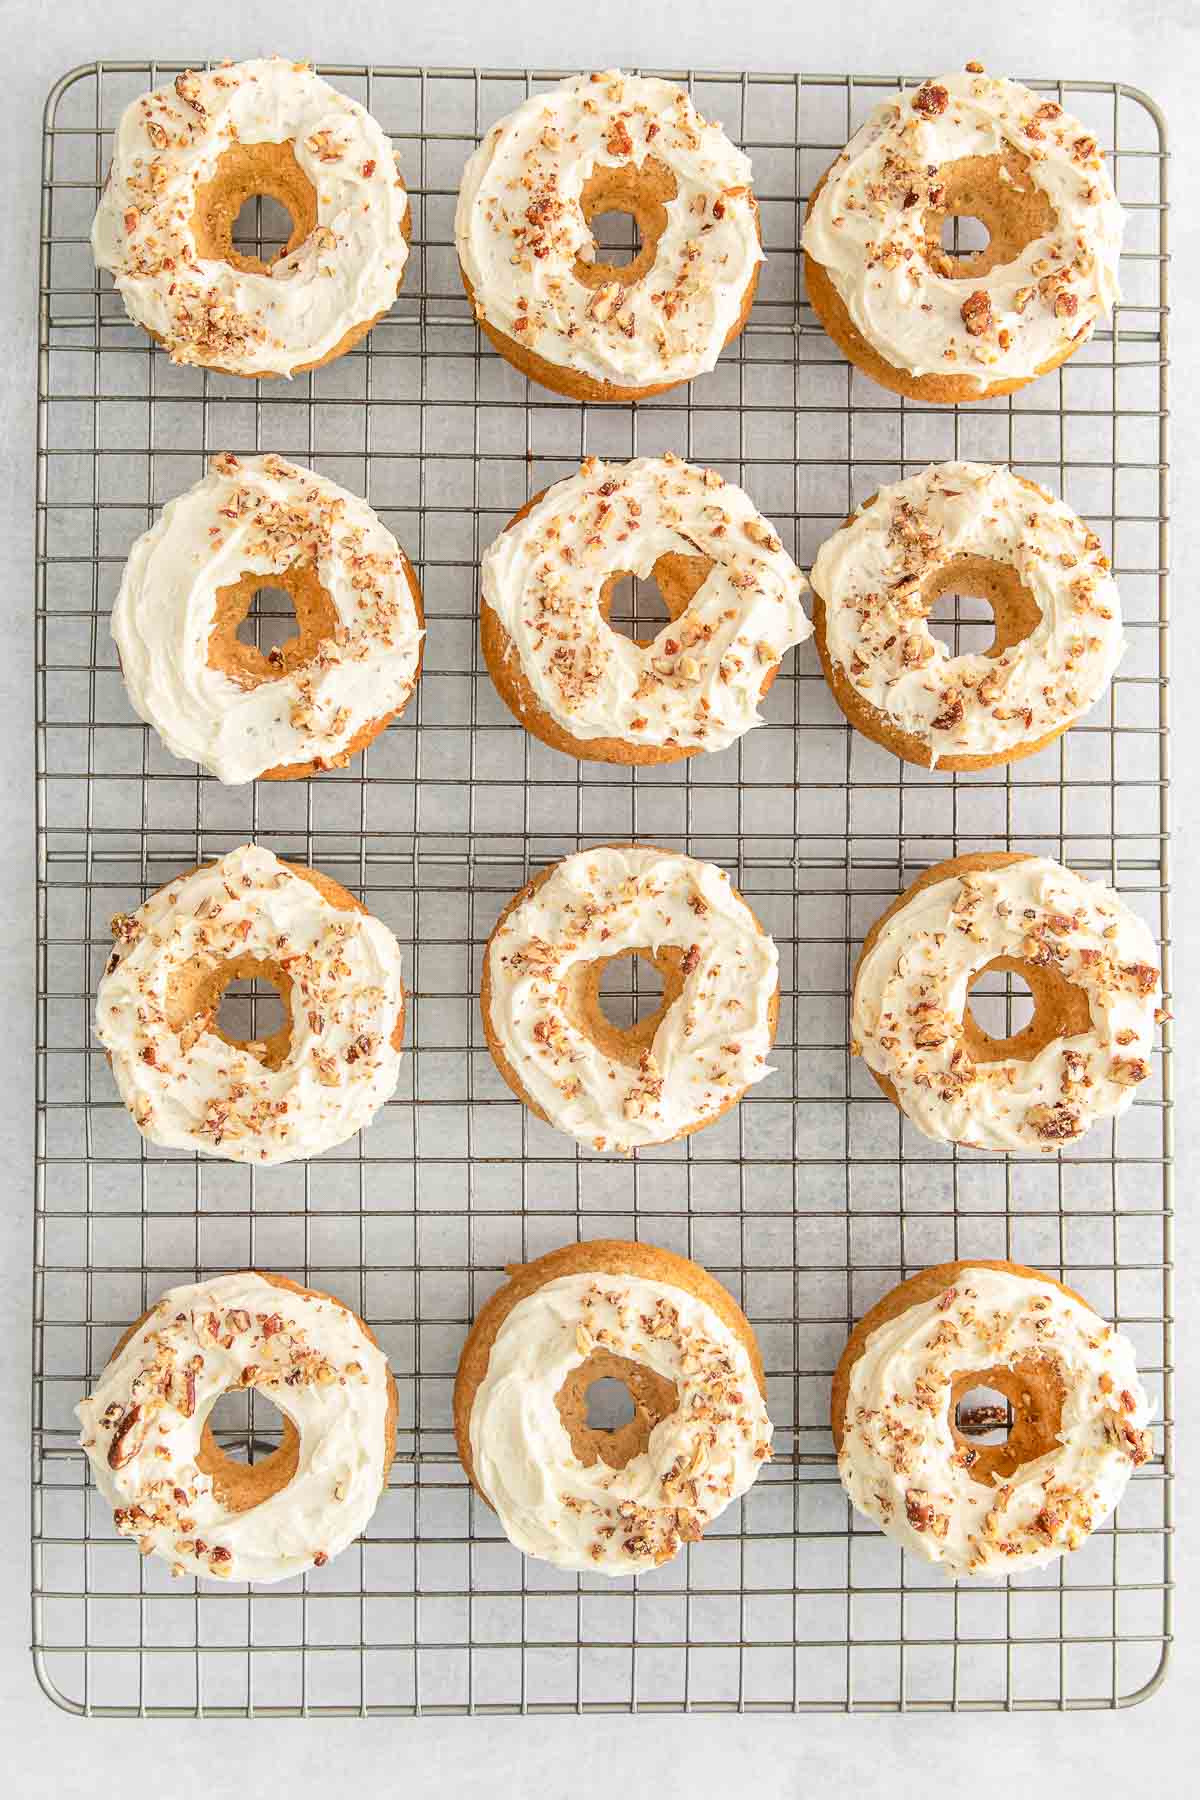 Maple donuts on a wire cooling rack.